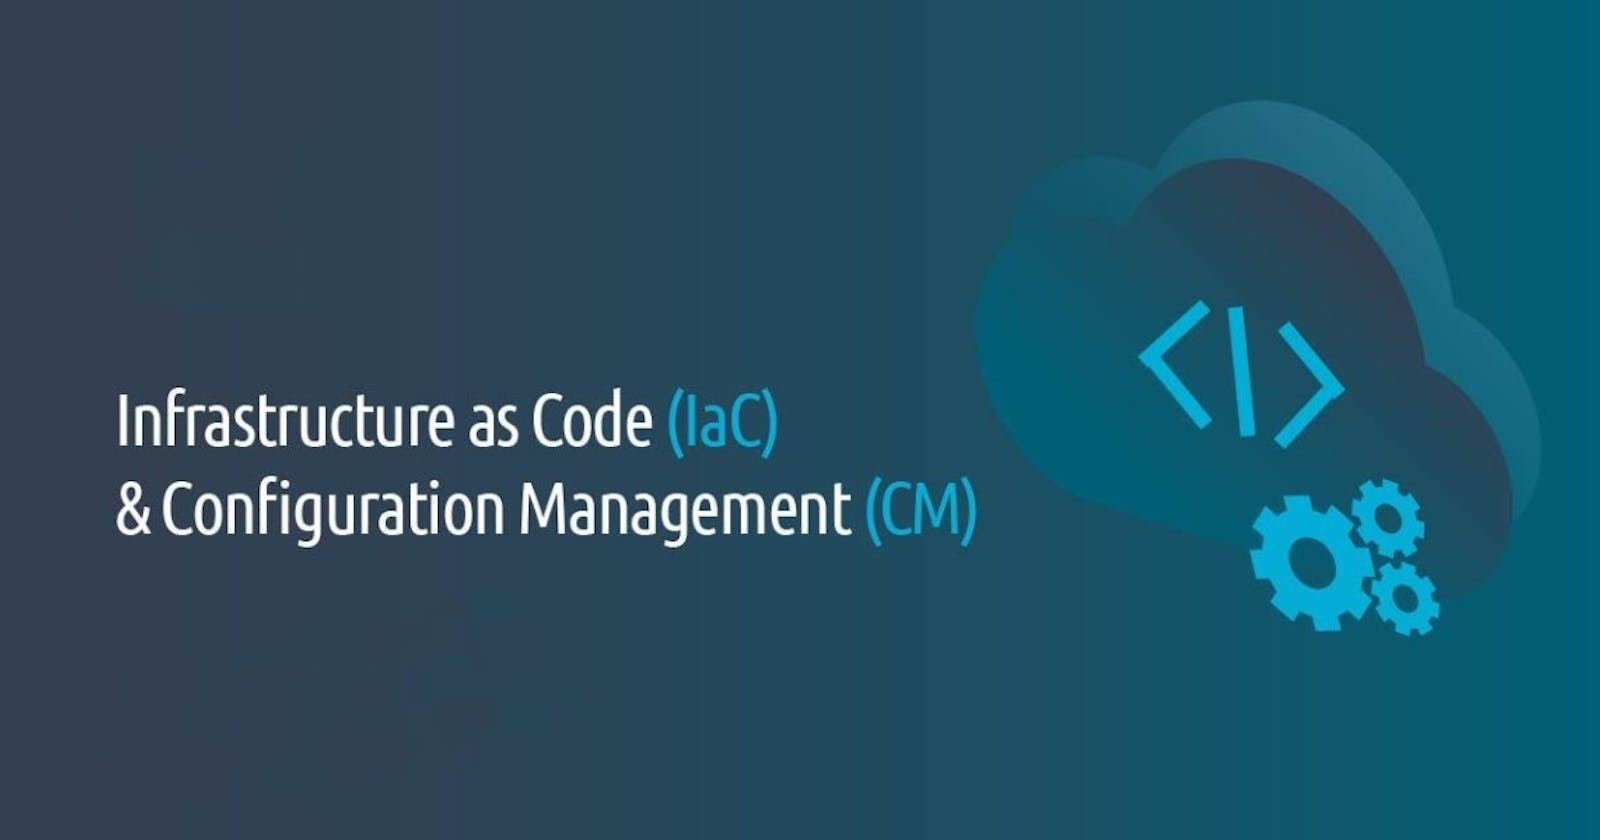 Day 52: Understanding Infrastructure as Code and Configuration Management